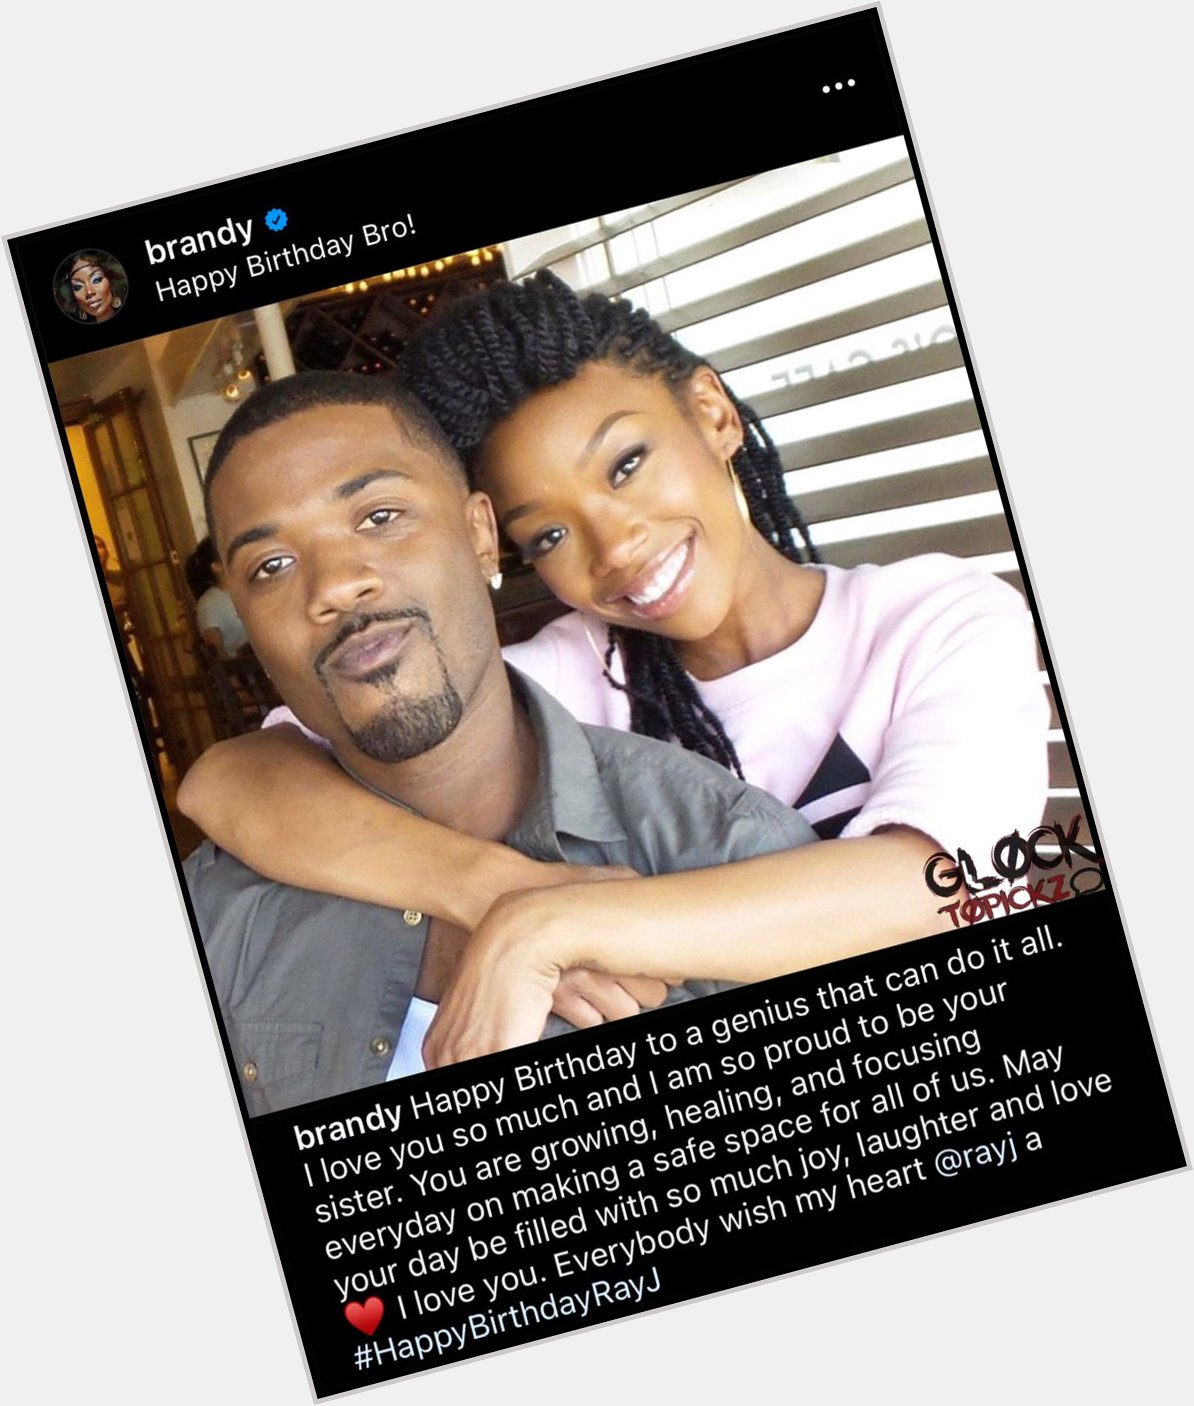 Brandy wishes her little brother Ray J a Happy 41st Birthday 